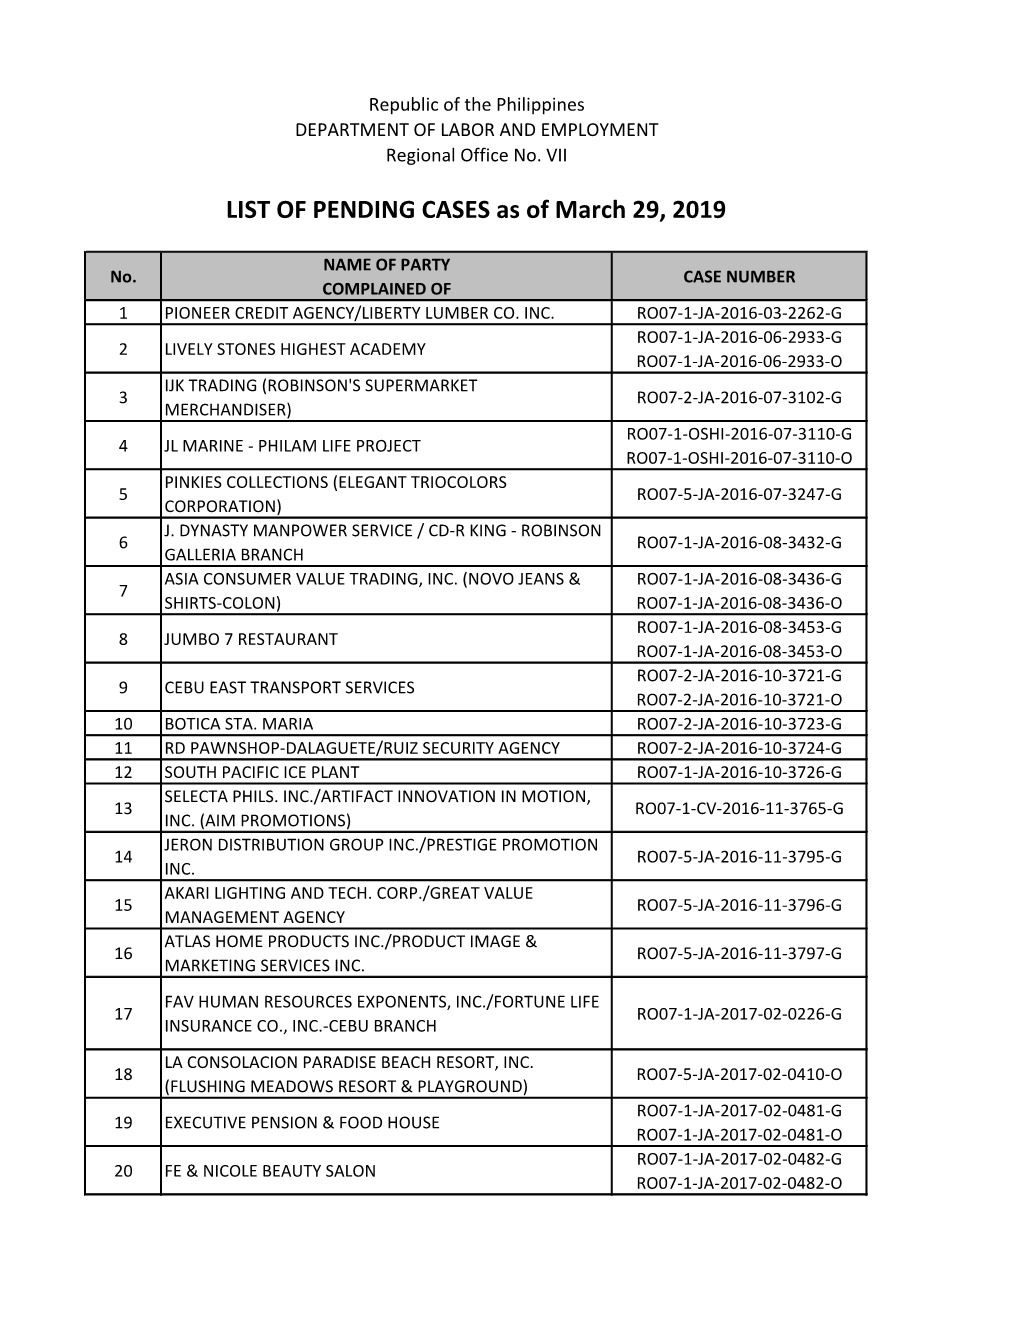 LIST of PENDING CASES As of March 29, 2019